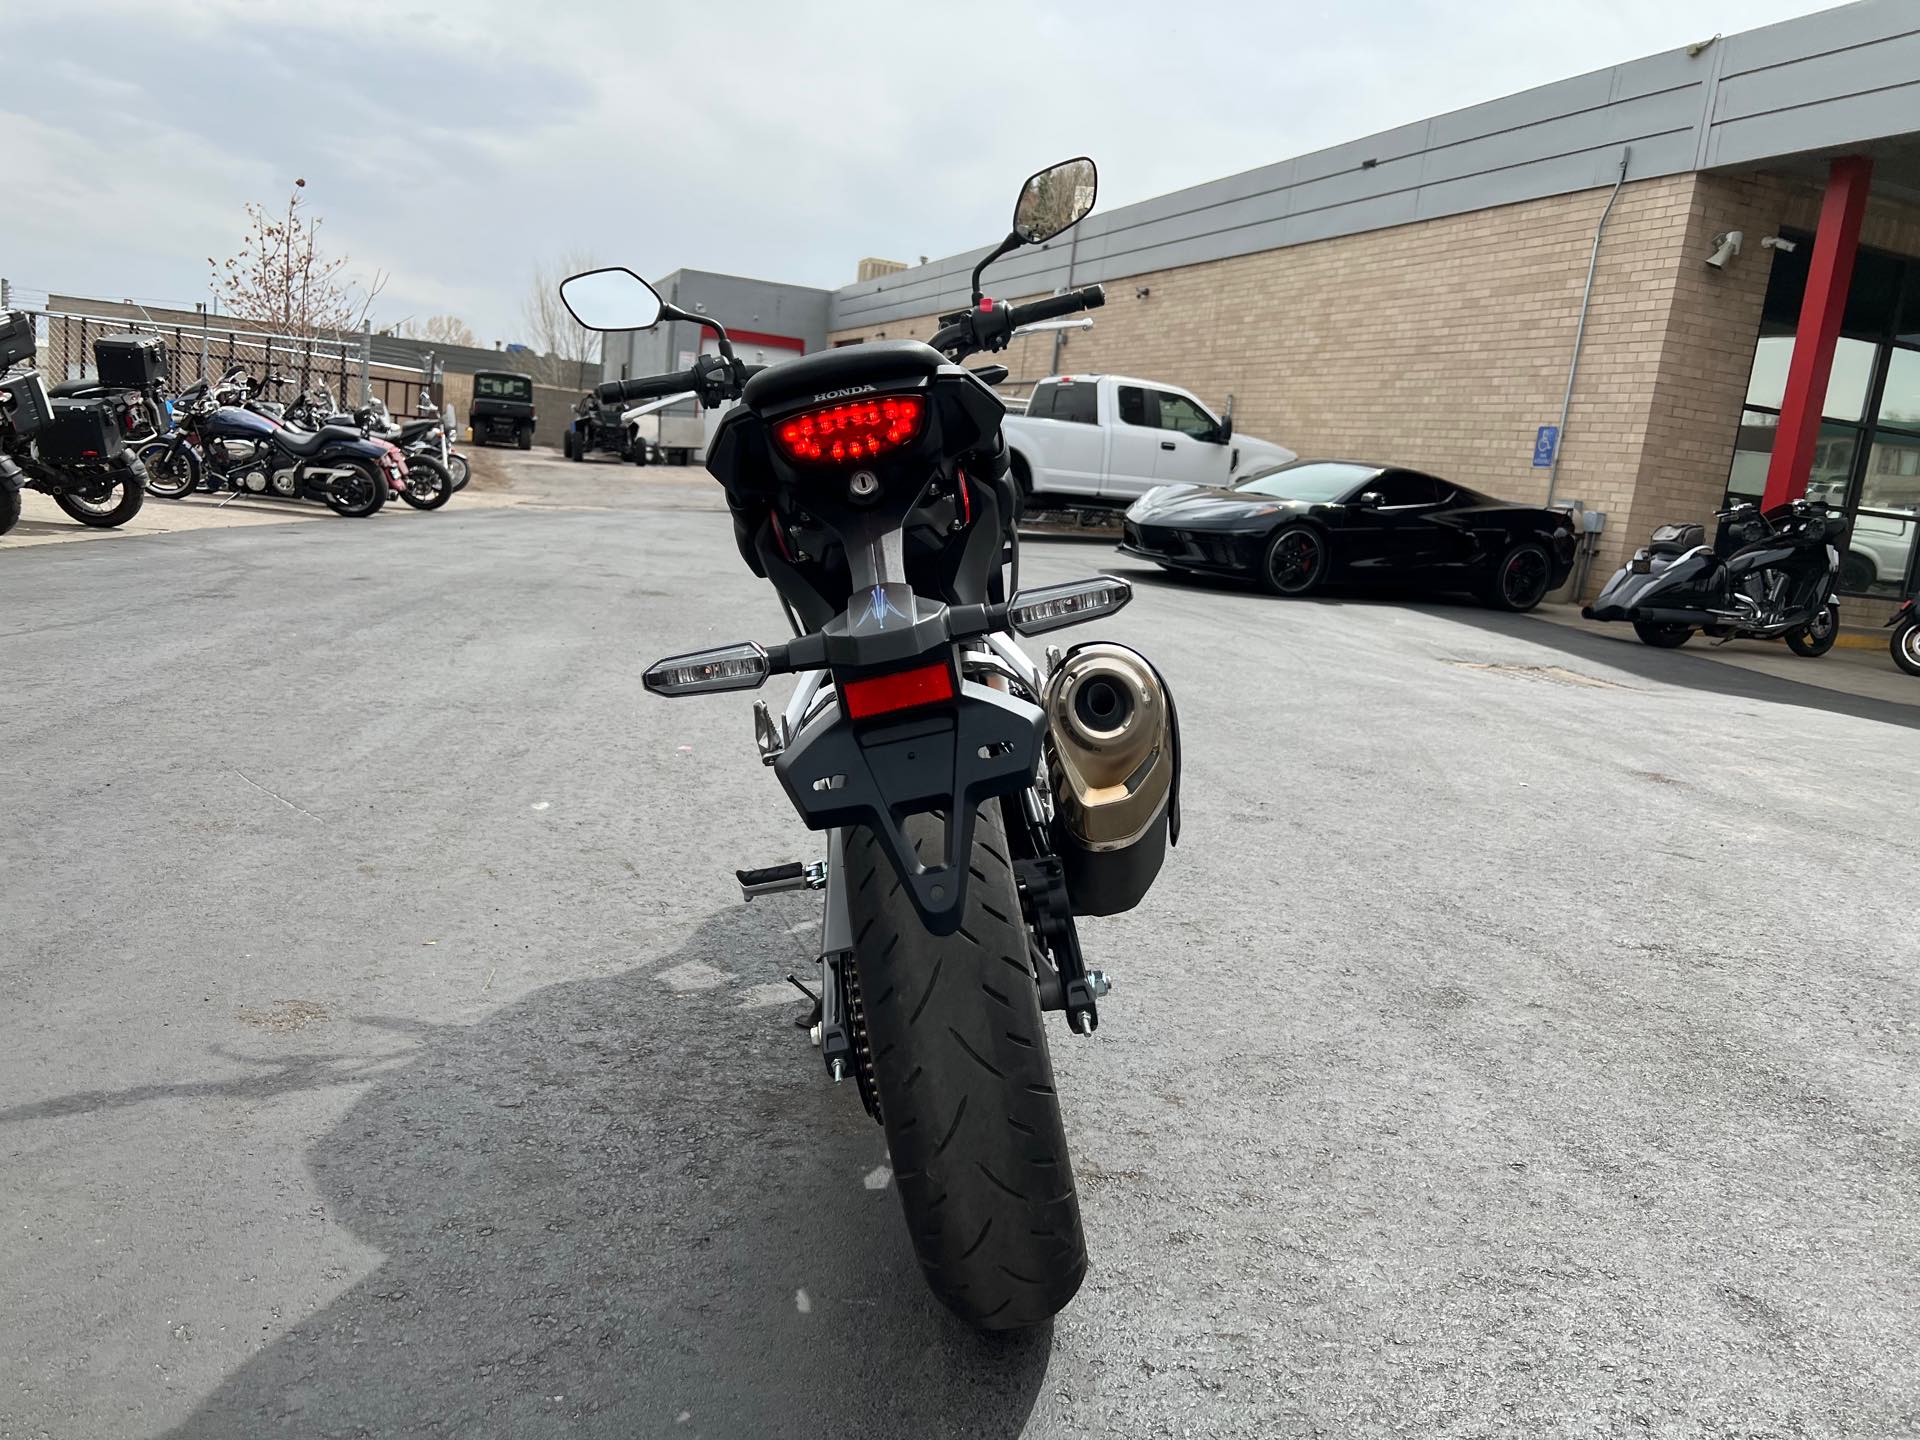 2021 Honda CB300R ABS at Aces Motorcycles - Fort Collins